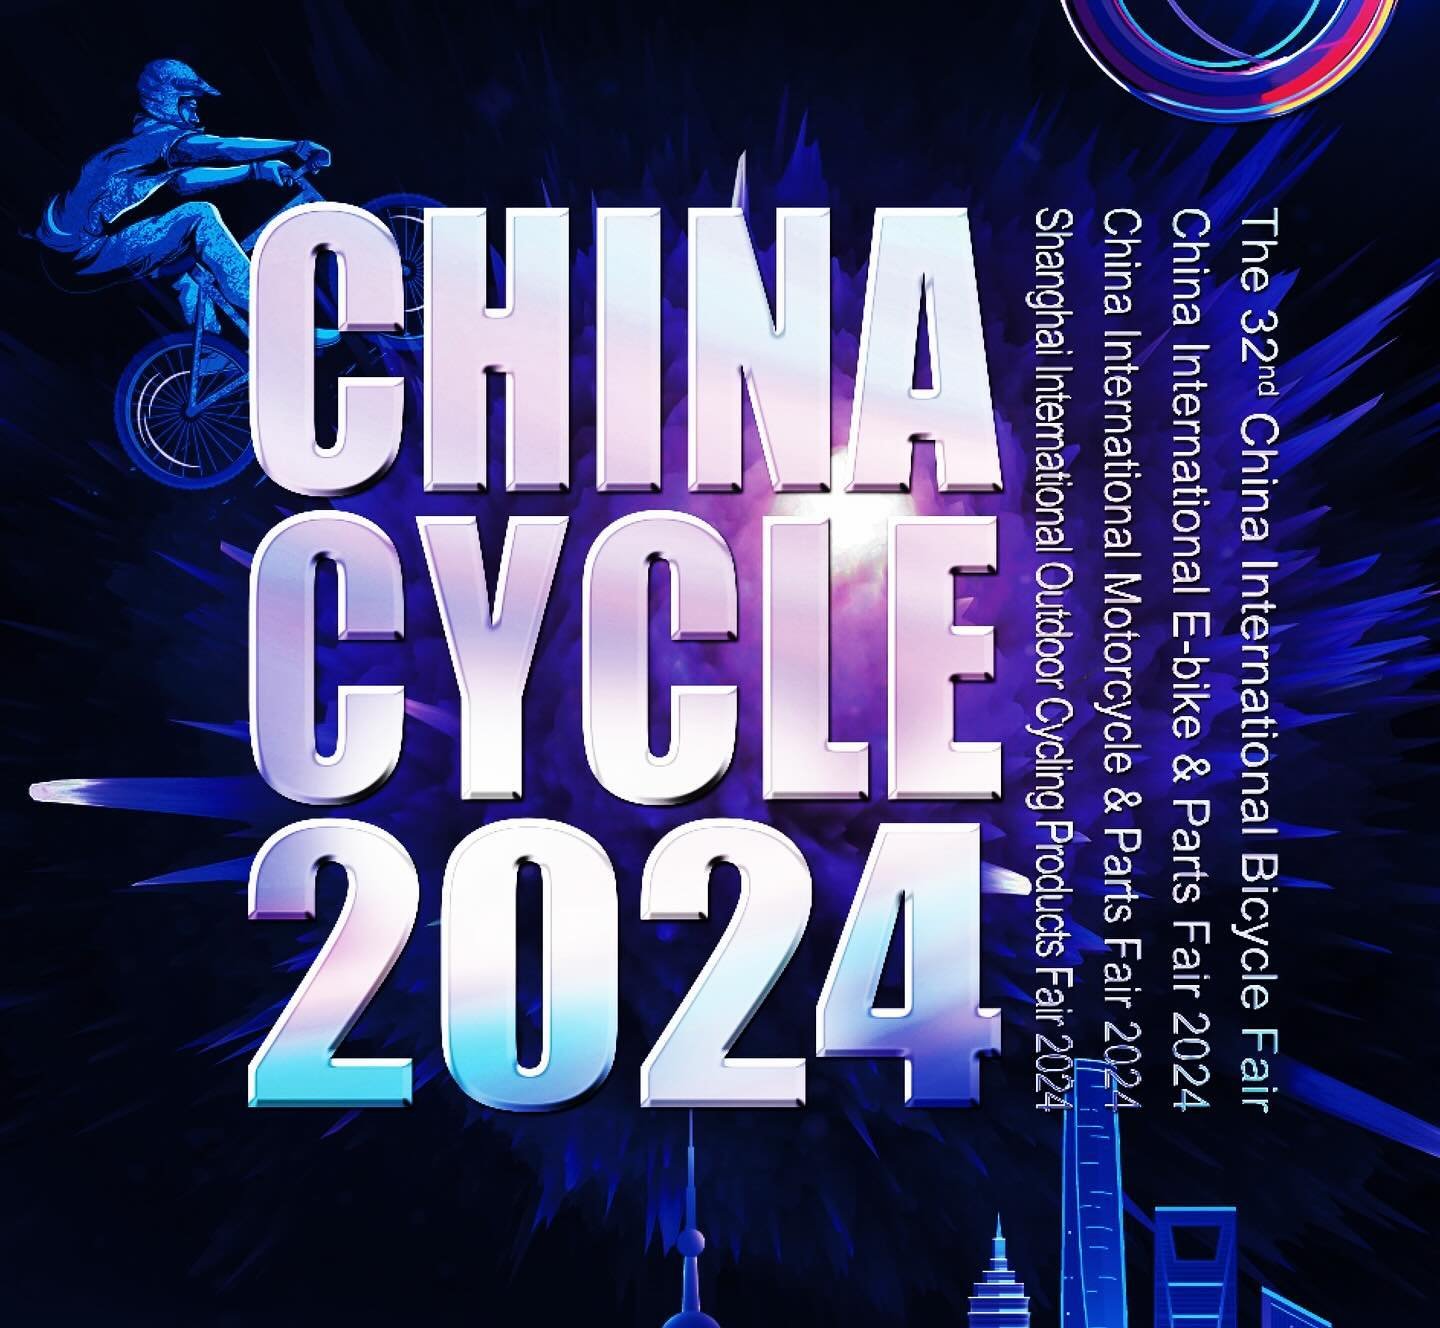 We are at China Cycle 2024 in Shanghai today! See you there! 

#WeCreateAdvantage

#oerus #bike #bicycle #ebike #electricbike #electricbicycle #emtb #bicyclefactory #bikeproduction #bikemanufacturer #fahrrad #fahrradmanufaktur #oem #manufacturing #su